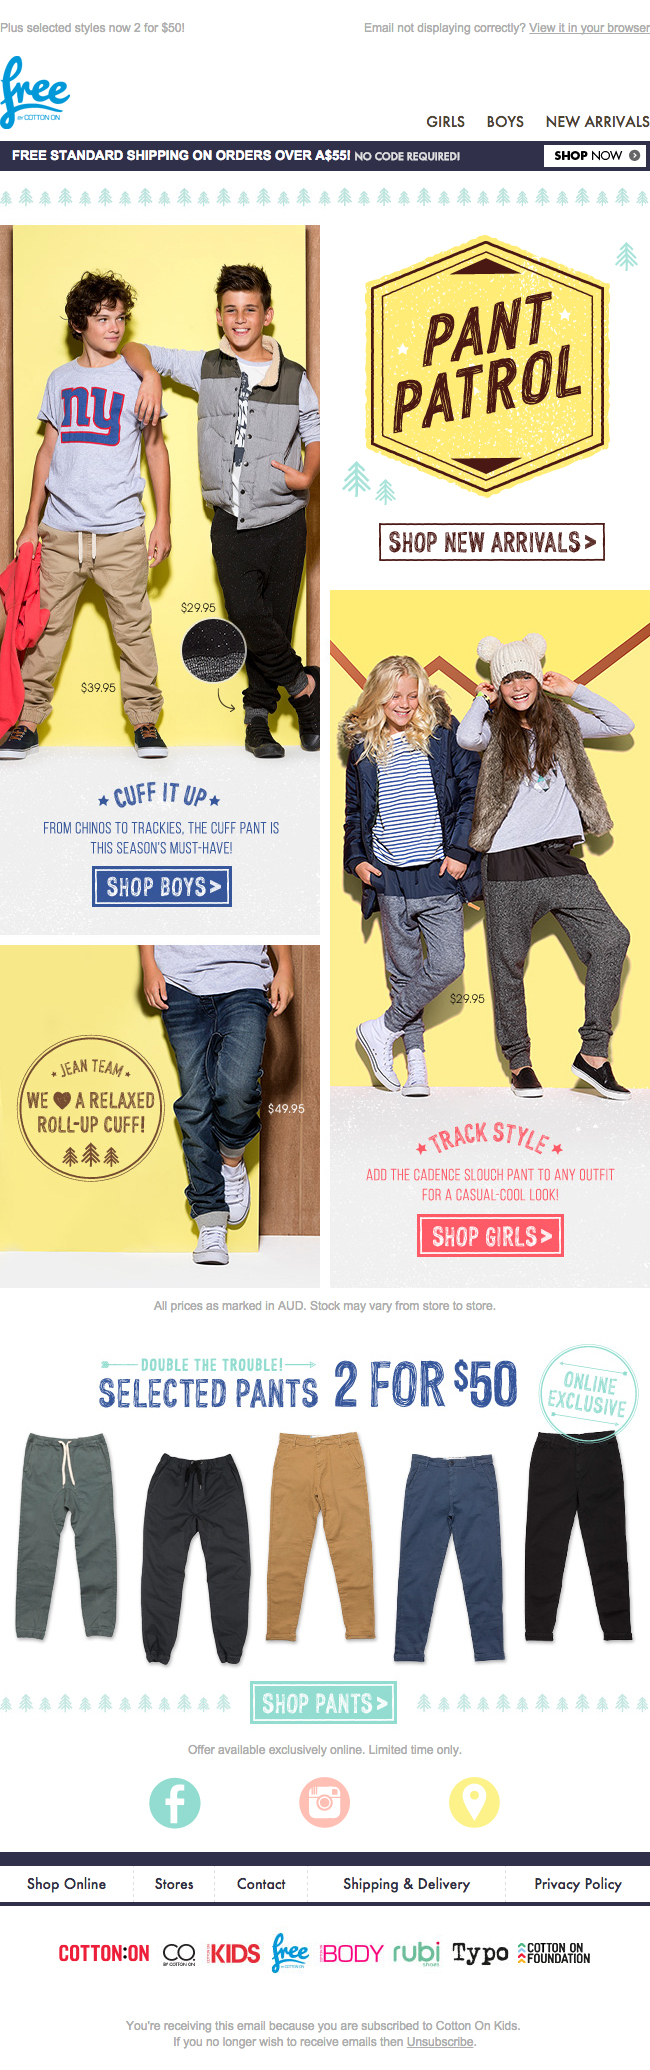 Free by Cotton On 201504 pants